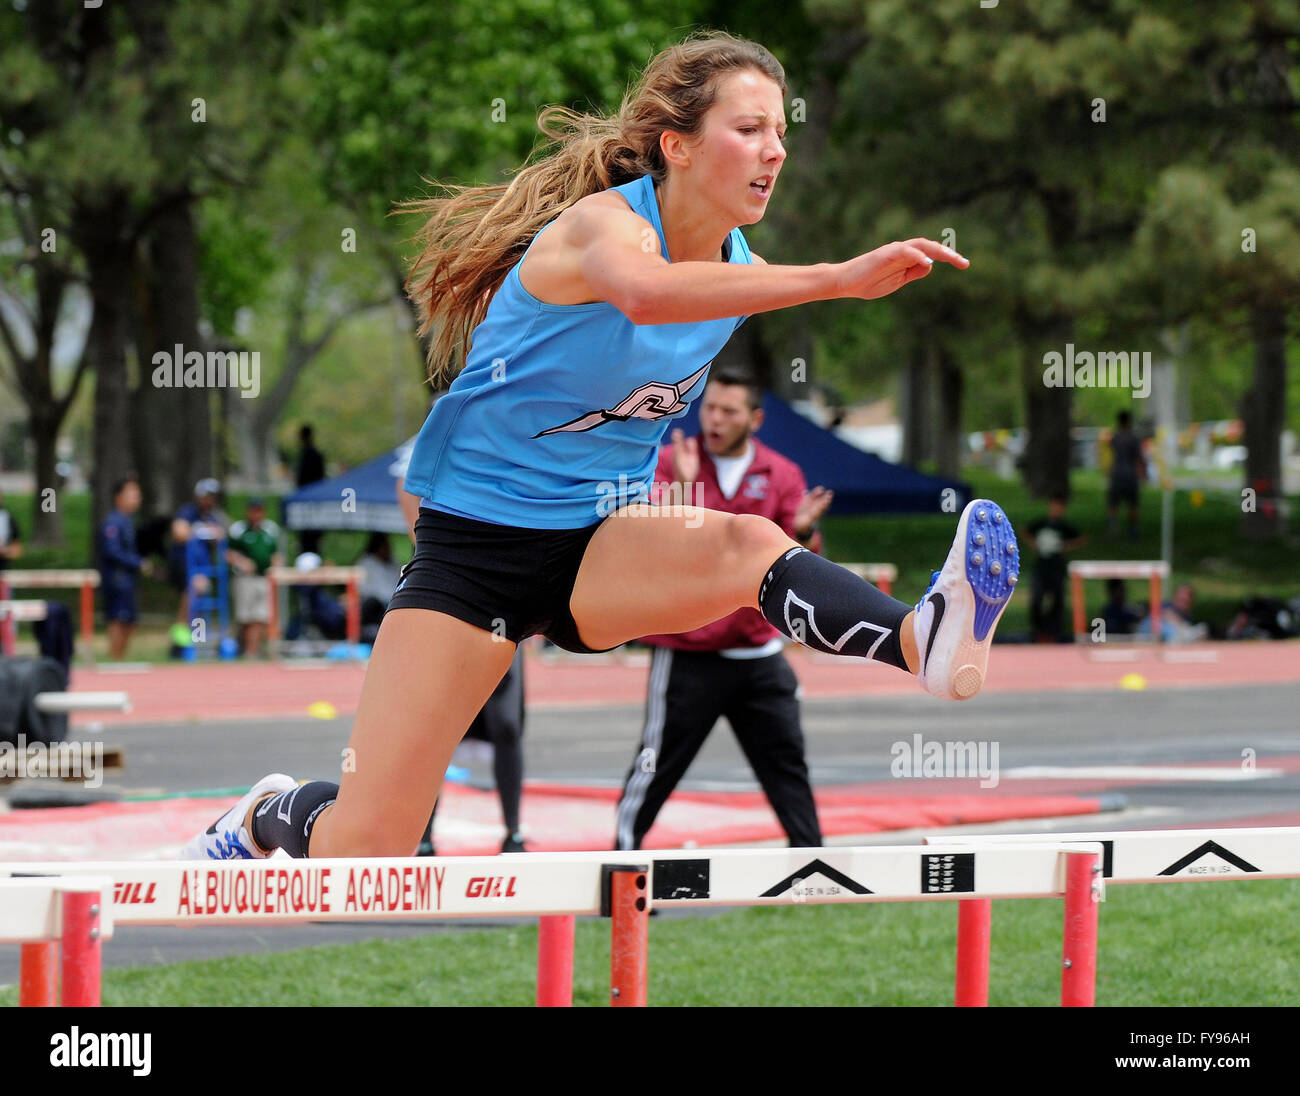 Albuquerque, NM, USA. 23rd Apr, 2016. Cleveland's Sarah Mackin clears the hurdle for the lead in the girls 300 meter hurdles at the Richard Harper track Meet. Saturday, April. 23, 2016. © Jim Thompson/Albuquerque Journal/ZUMA Wire/Alamy Live News Stock Photo